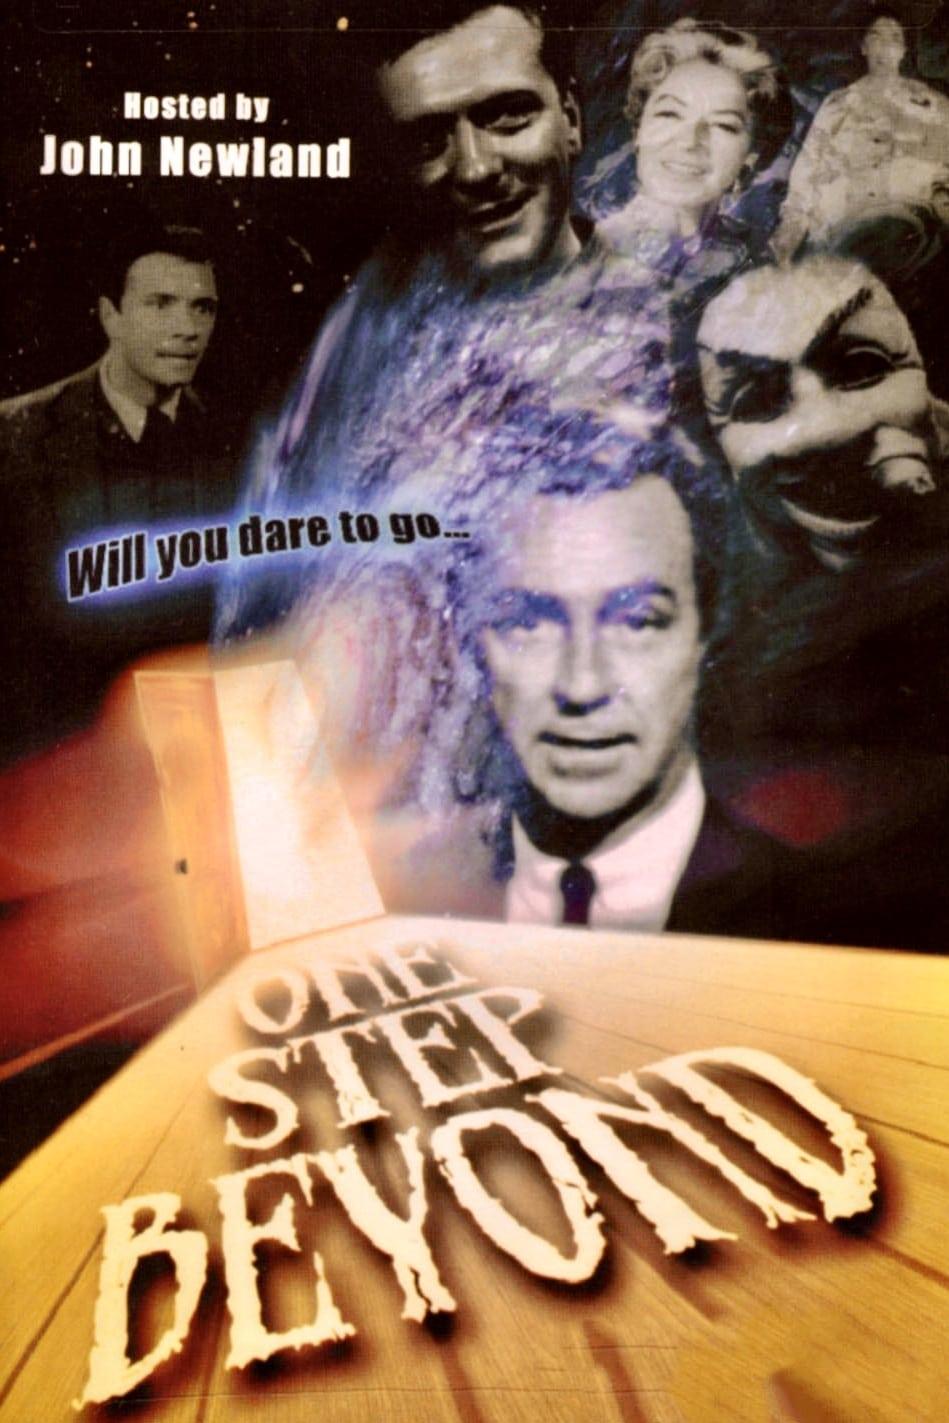 One Step Beyond poster